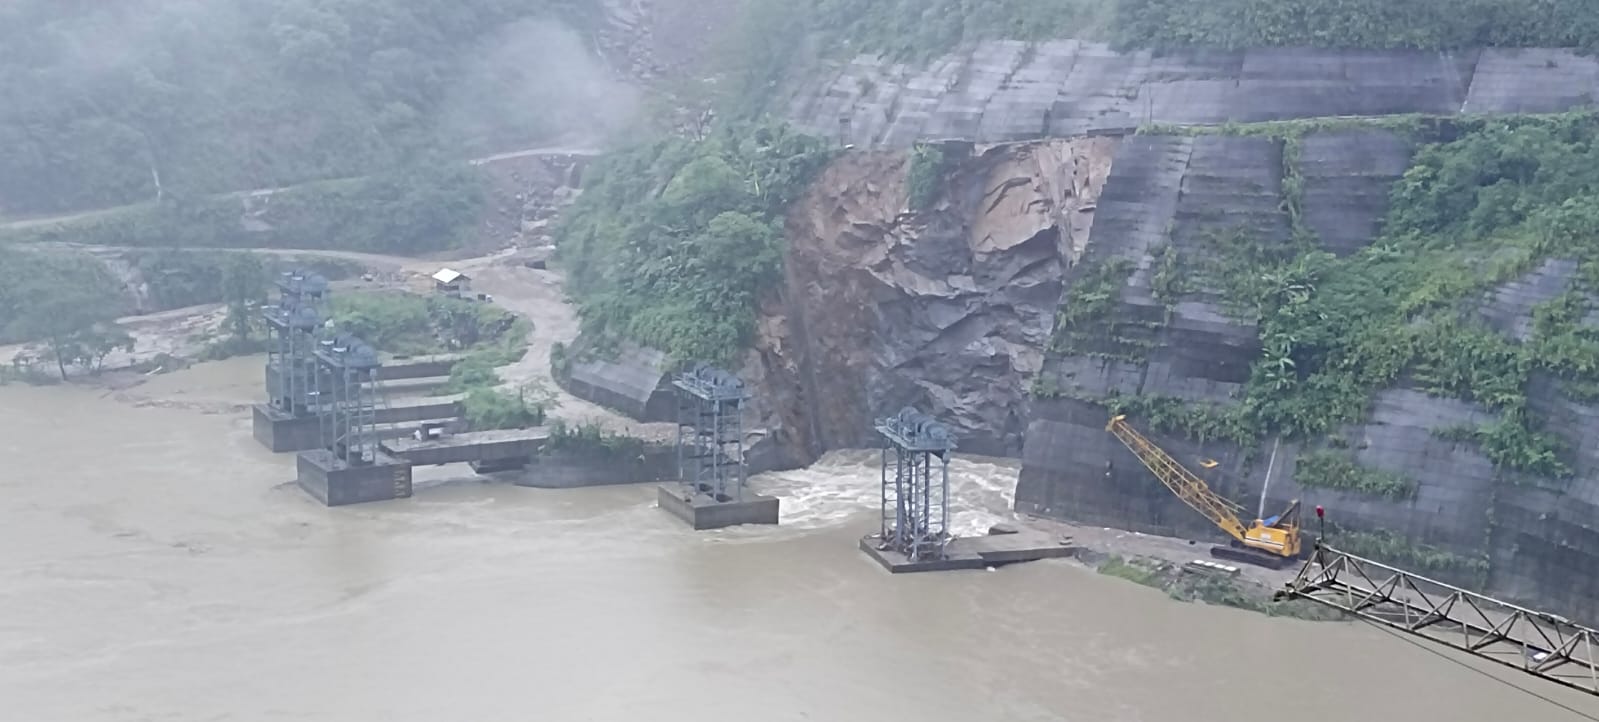 landslide-occurred-at-south-sovansiri-hydropower-project-site-in-gerukamukh